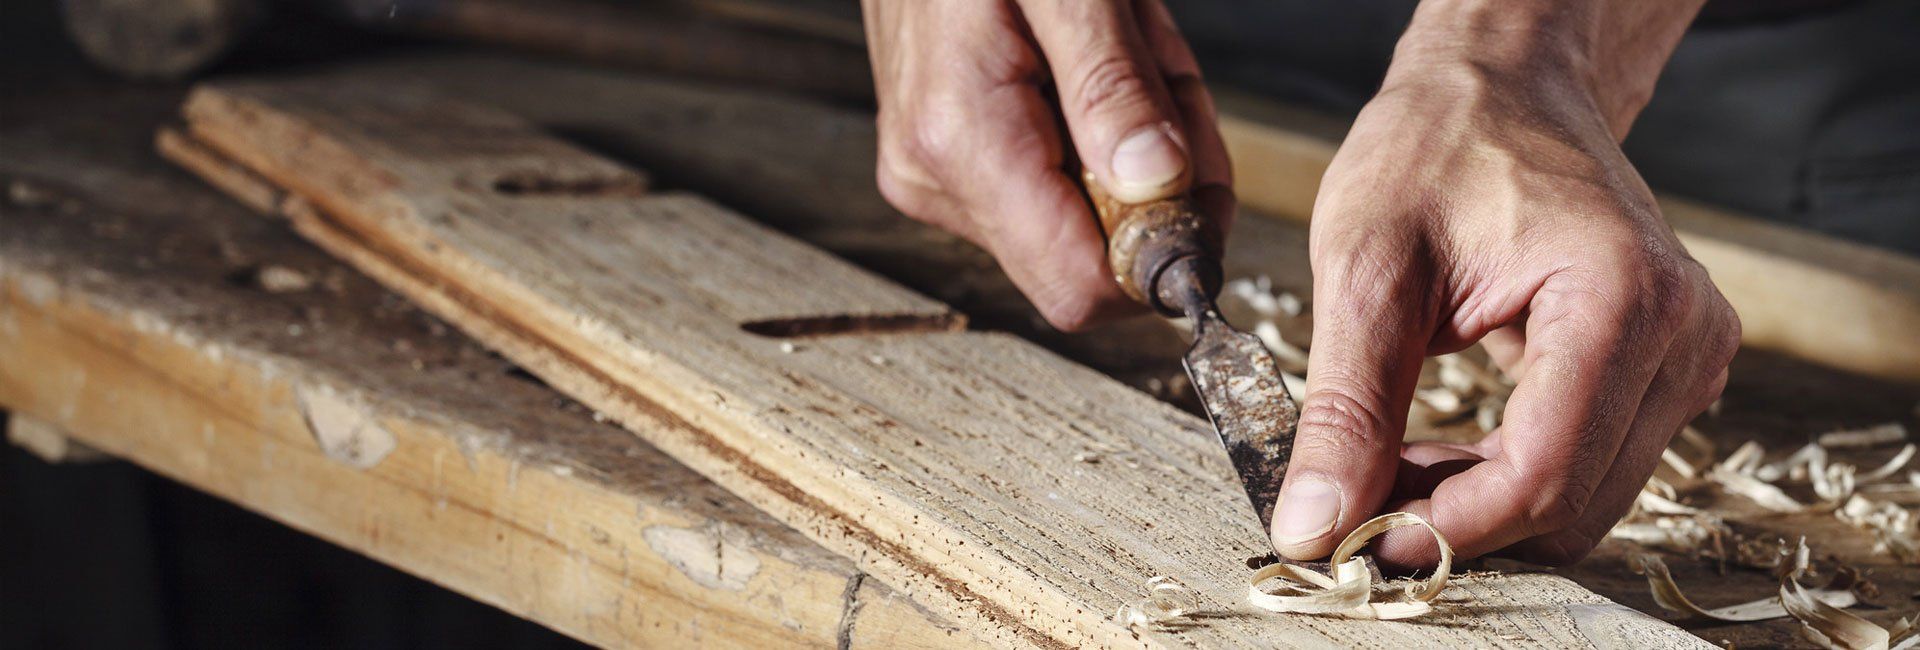 wood scraping by a carpenter